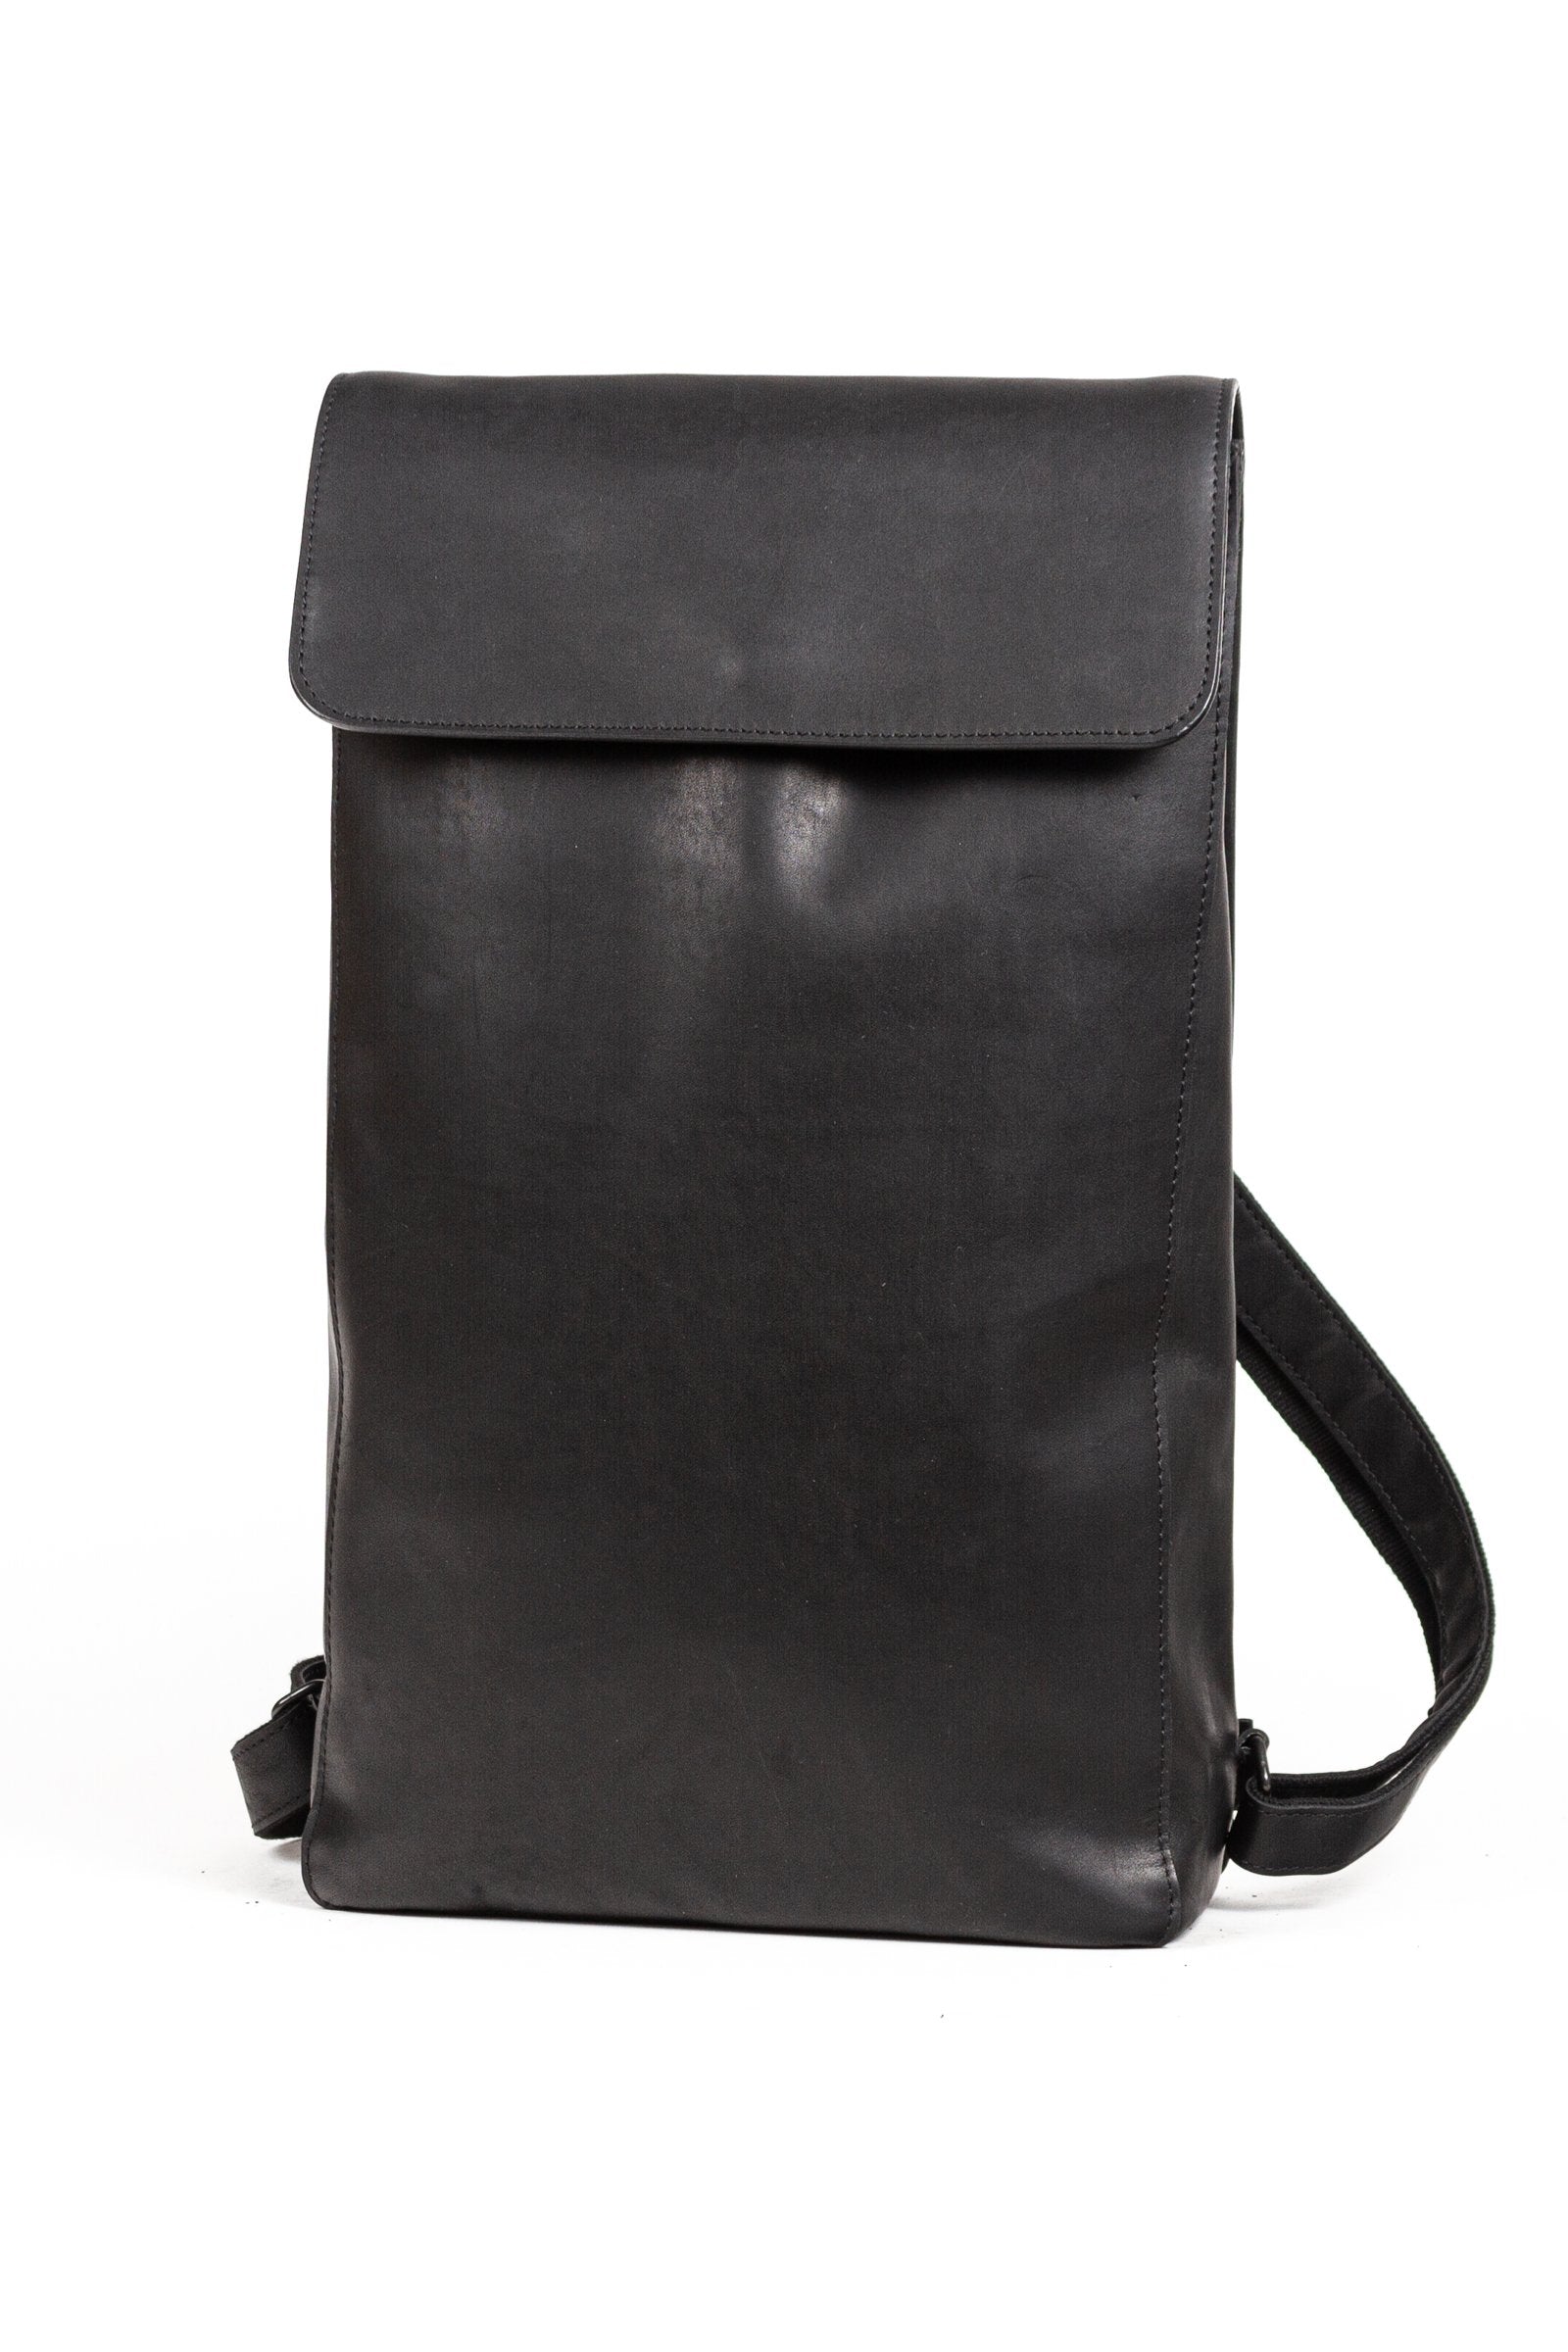 BEON.COM.AU The Jost Futura Long Line Backpack is a leather bag made in Europe from premium European leathers and fabrics. 1 main compartment, inner compartment with zipper 13" Laptop, 1 portrait wide folder, outer compartment with zipper Backstrap adjustable and removable 47cm x 28cm x 8cm 8.42L volume... Jost at BEON.COM.AU